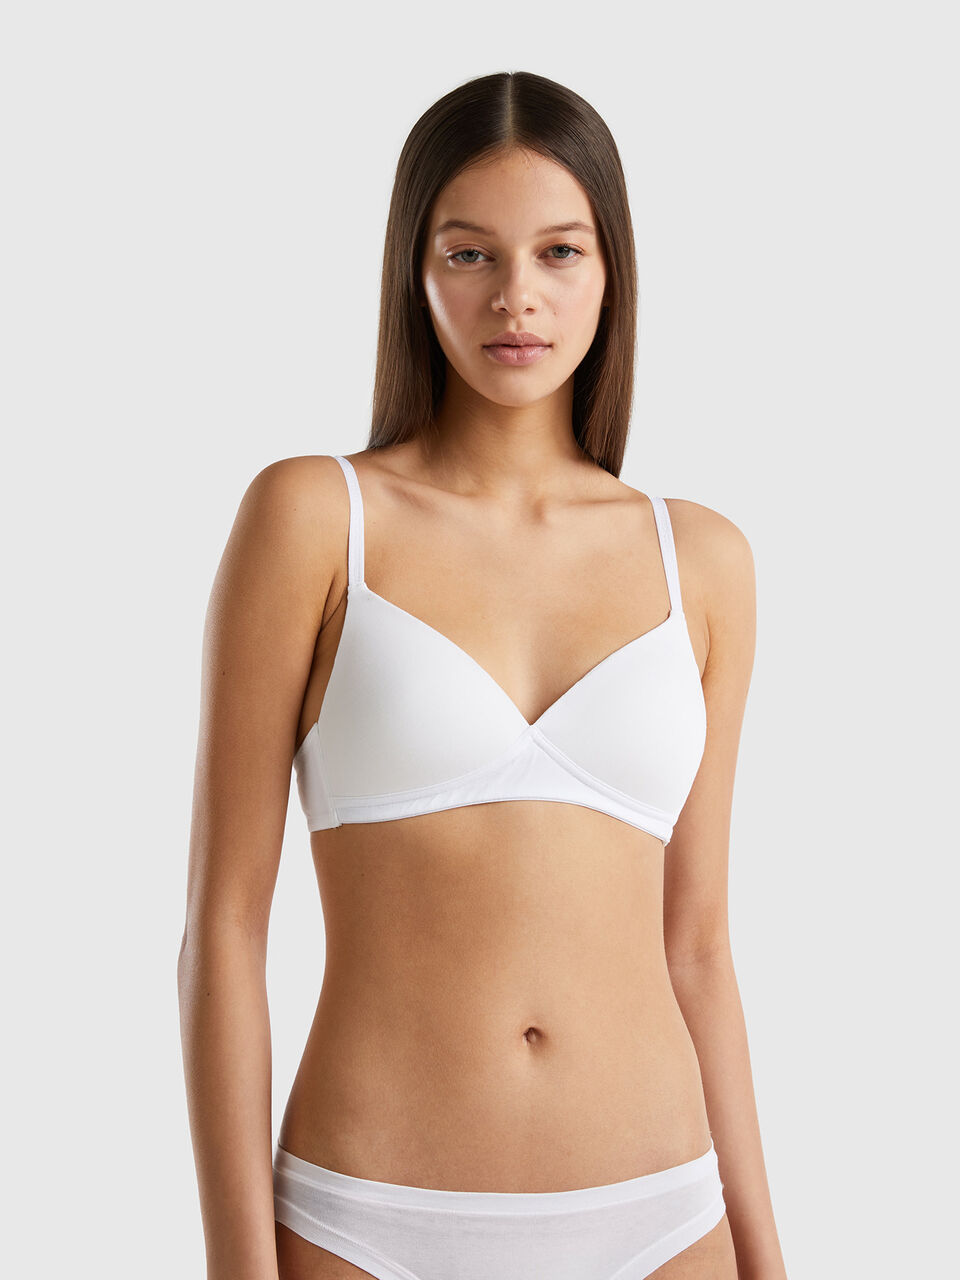 Buy France Beauty 100% Cotton Non-Padded White Bra-Round